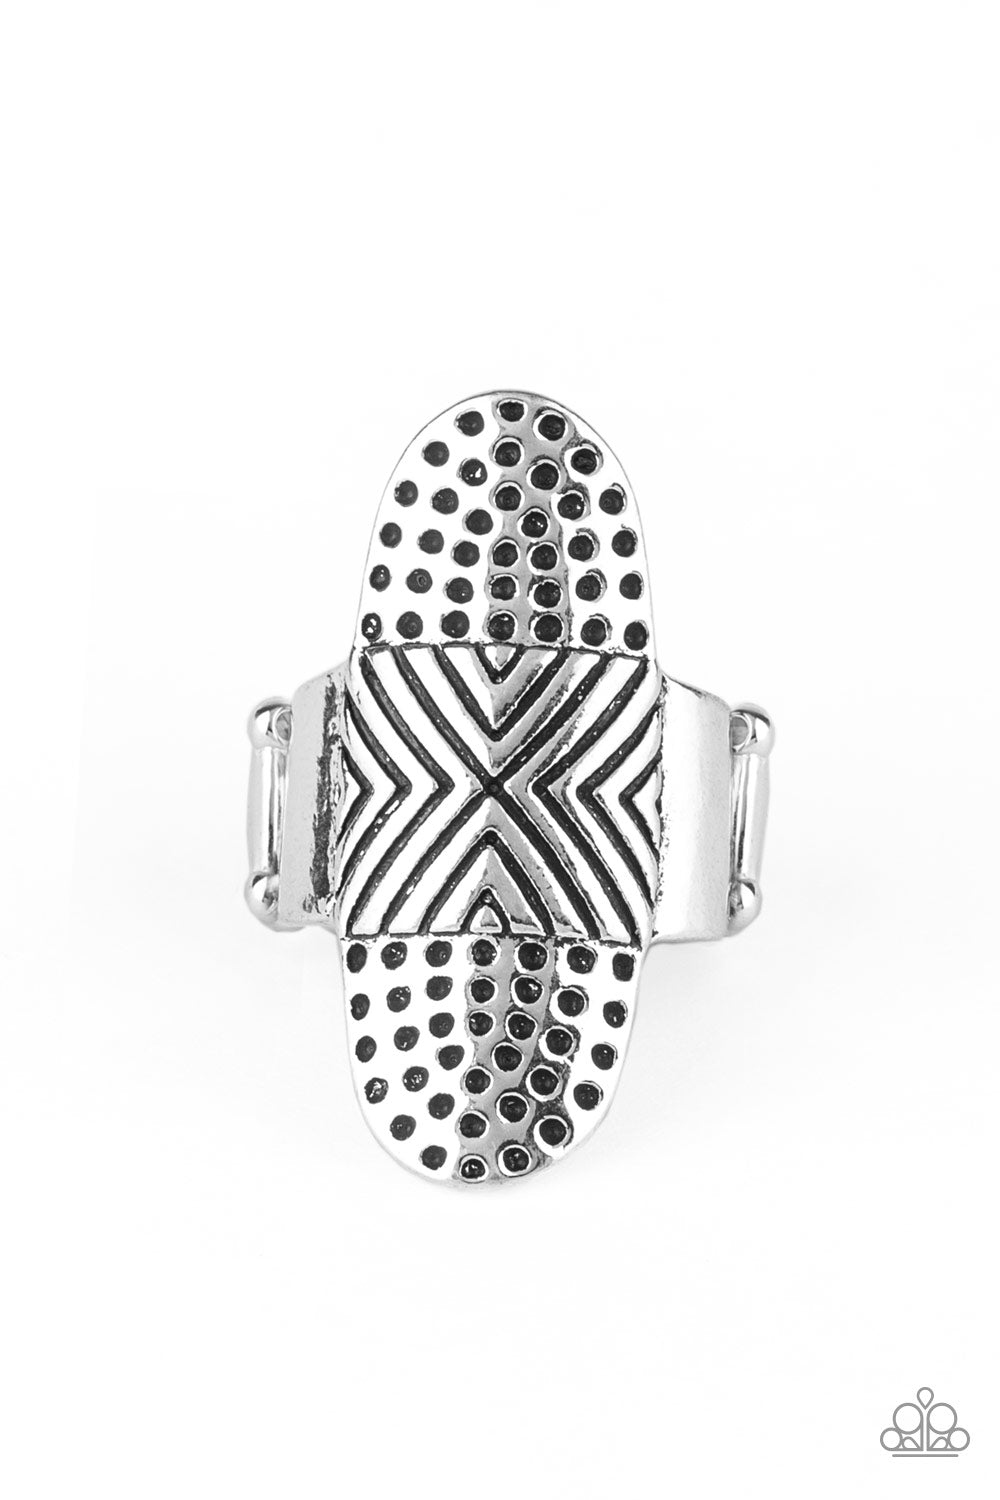 &lt;P&gt;Engraved in antiqued geometric patterns, a thick silver band overlaps a hammered oval frame, coalescing into a rustic centerpiece atop the finger. Features a stretchy band for a flexible fit.
  &lt;/P&gt;  

&lt;P&gt; &lt;I&gt;  Sold as one individual ring.
&lt;/I&gt;&lt;/P&gt;

&lt;img src=\&quot;https://d9b54x484lq62.cloudfront.net/paparazzi/shopping/images/517_tag150x115_1.png\&quot; alt=\&quot;New Kit\&quot; align=\&quot;middle\&quot; height=\&quot;50\&quot; width=\&quot;50\&quot;/&gt;